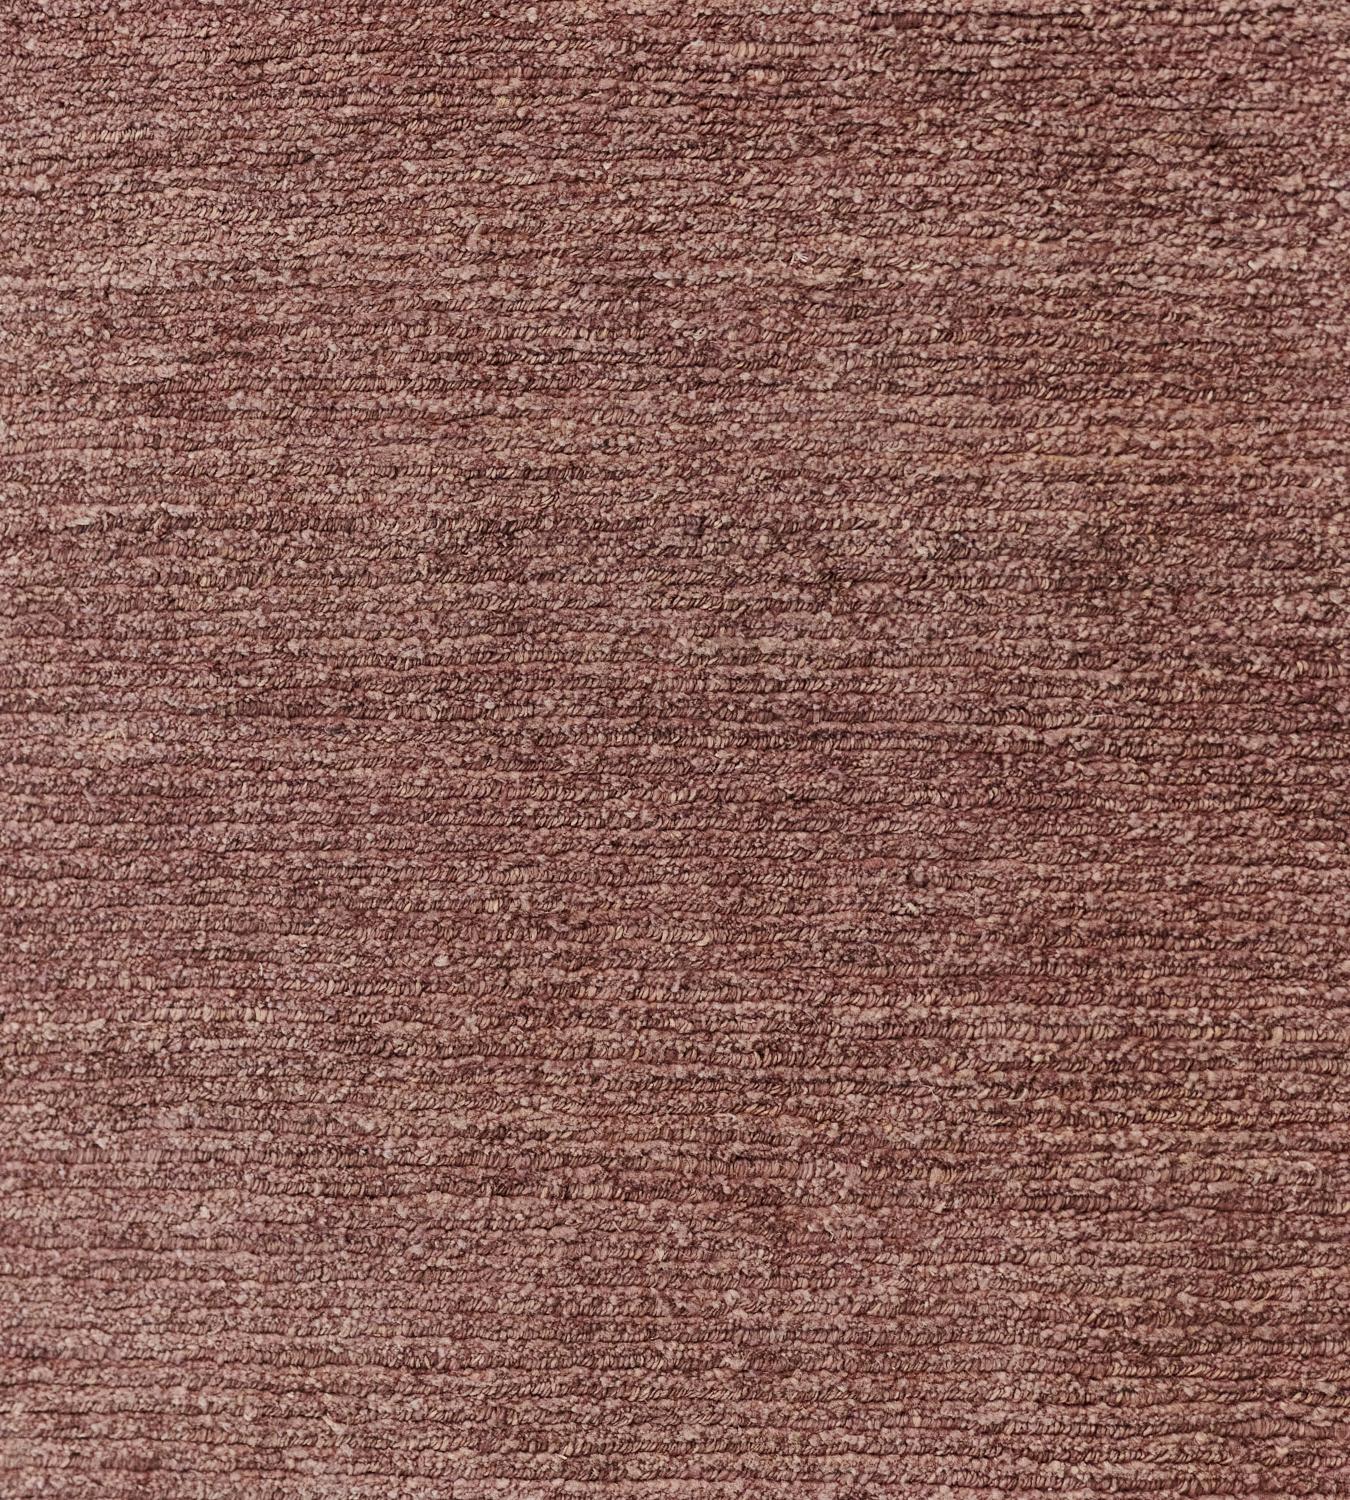 Handwoven Mauve Abrash Hemp Rug In New Condition For Sale In West Hollywood, CA